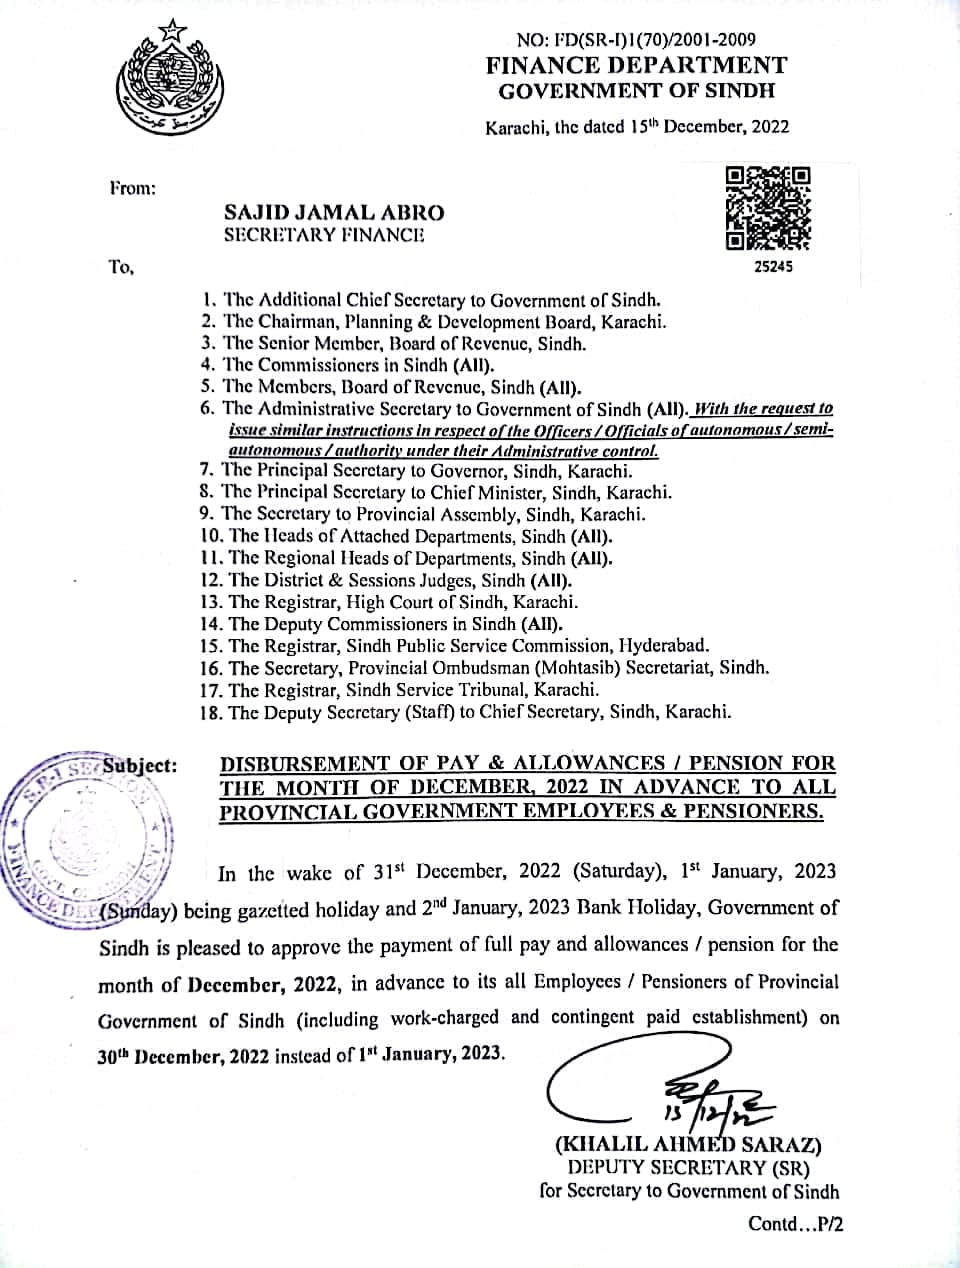 Advance Pay & Allowance/Pension Dec 2022 All Sindh Government Employees